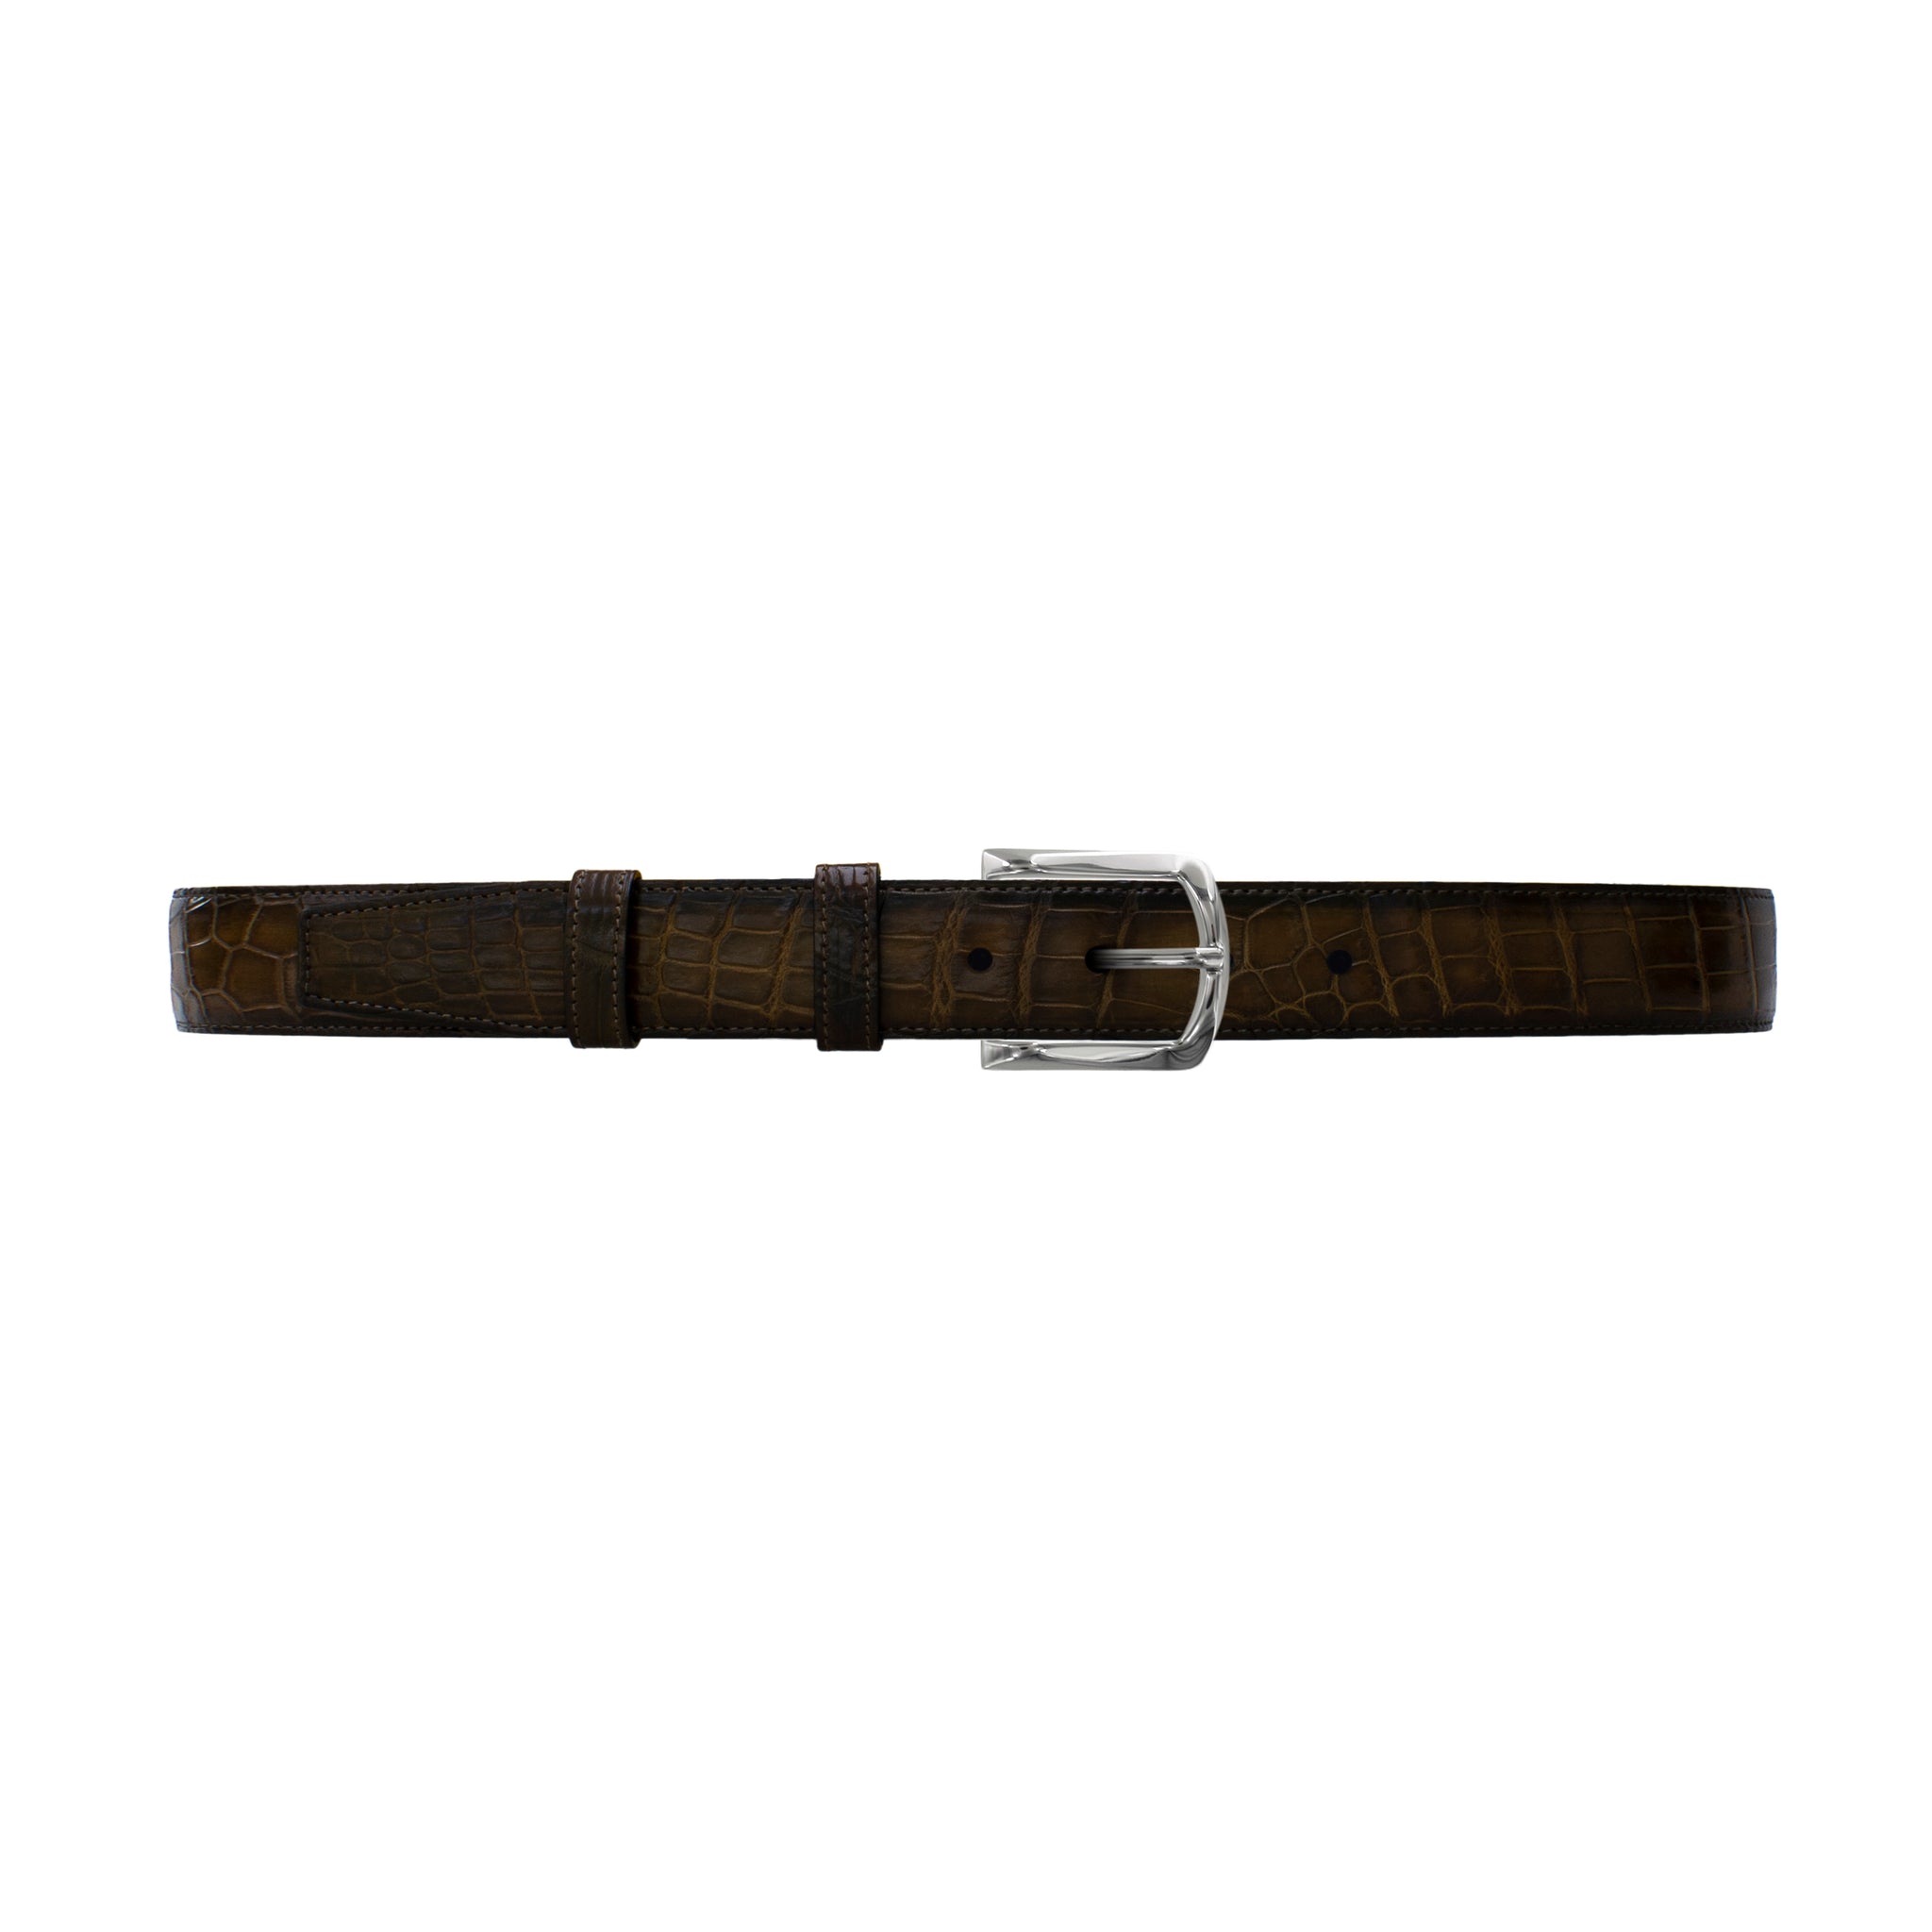 1 1/4" Walnut Patina Belt with Derby Cocktail Buckle in Polished Nickel